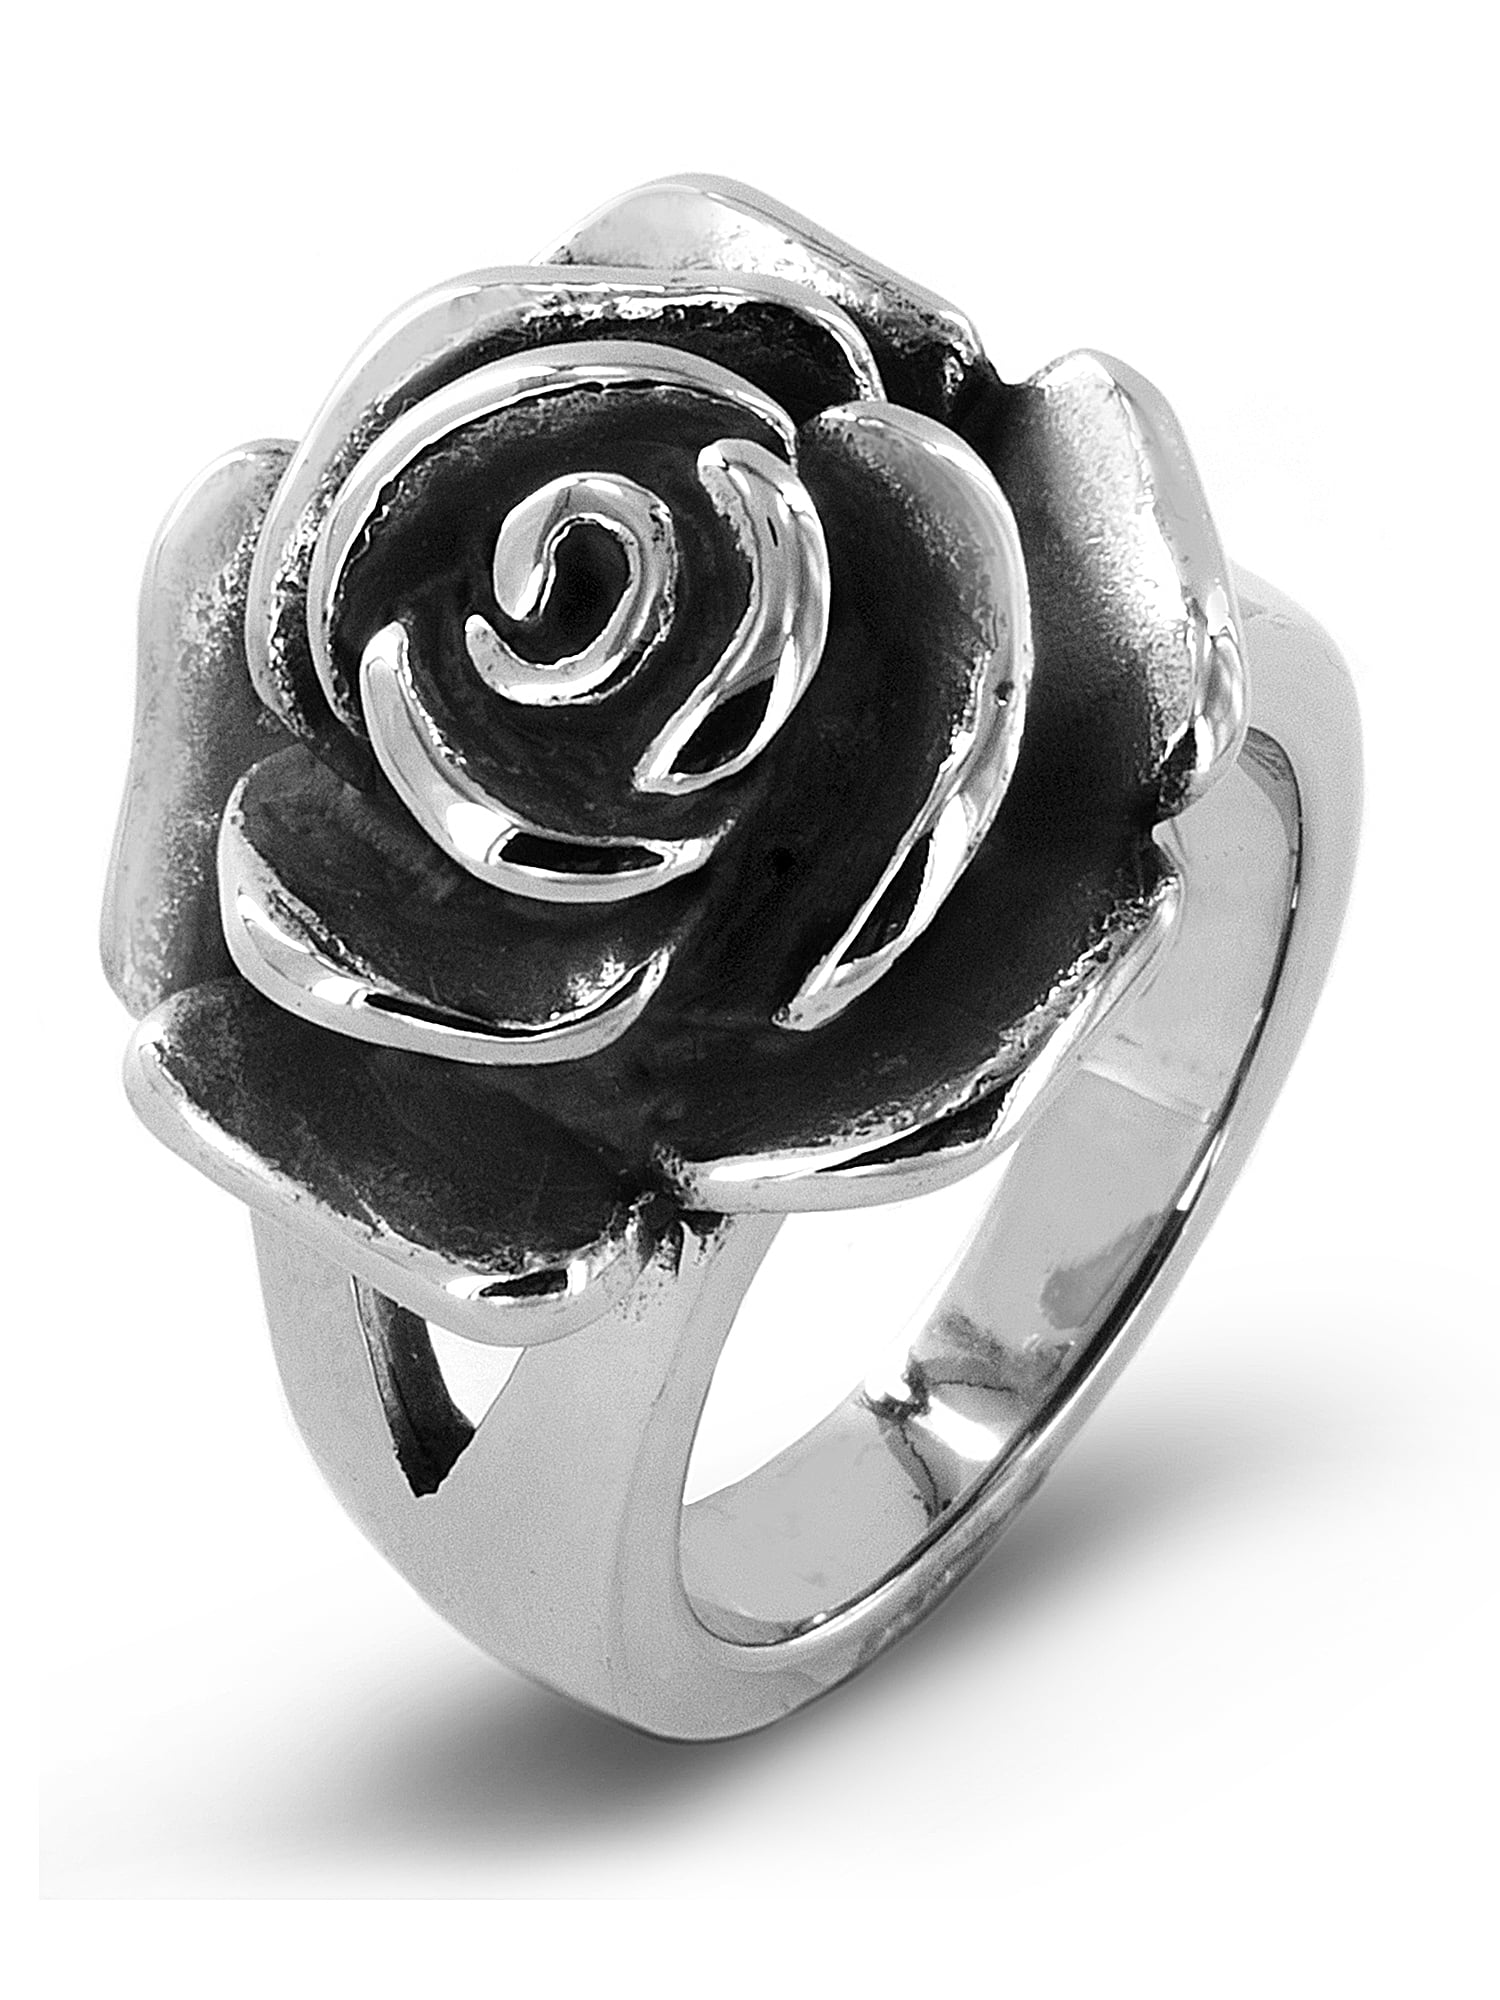 Large Rose Flower Ring Rose Ring Solid Sterling Silver Statement Ring Cocktail Ring